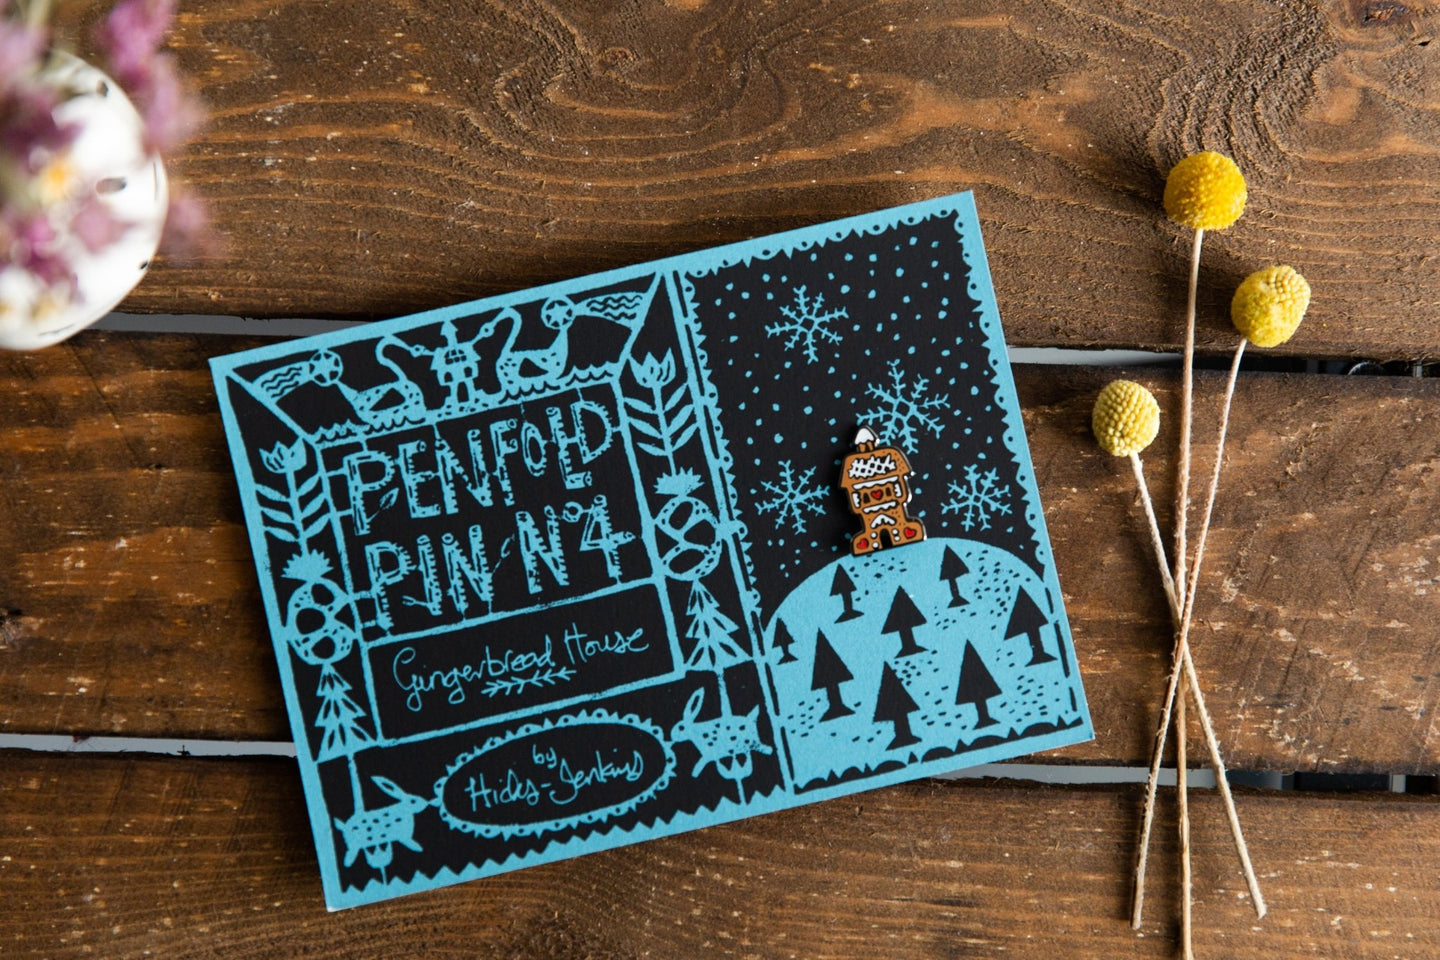 Gingerbread House - Penfold Pin 4 - Penfold Press